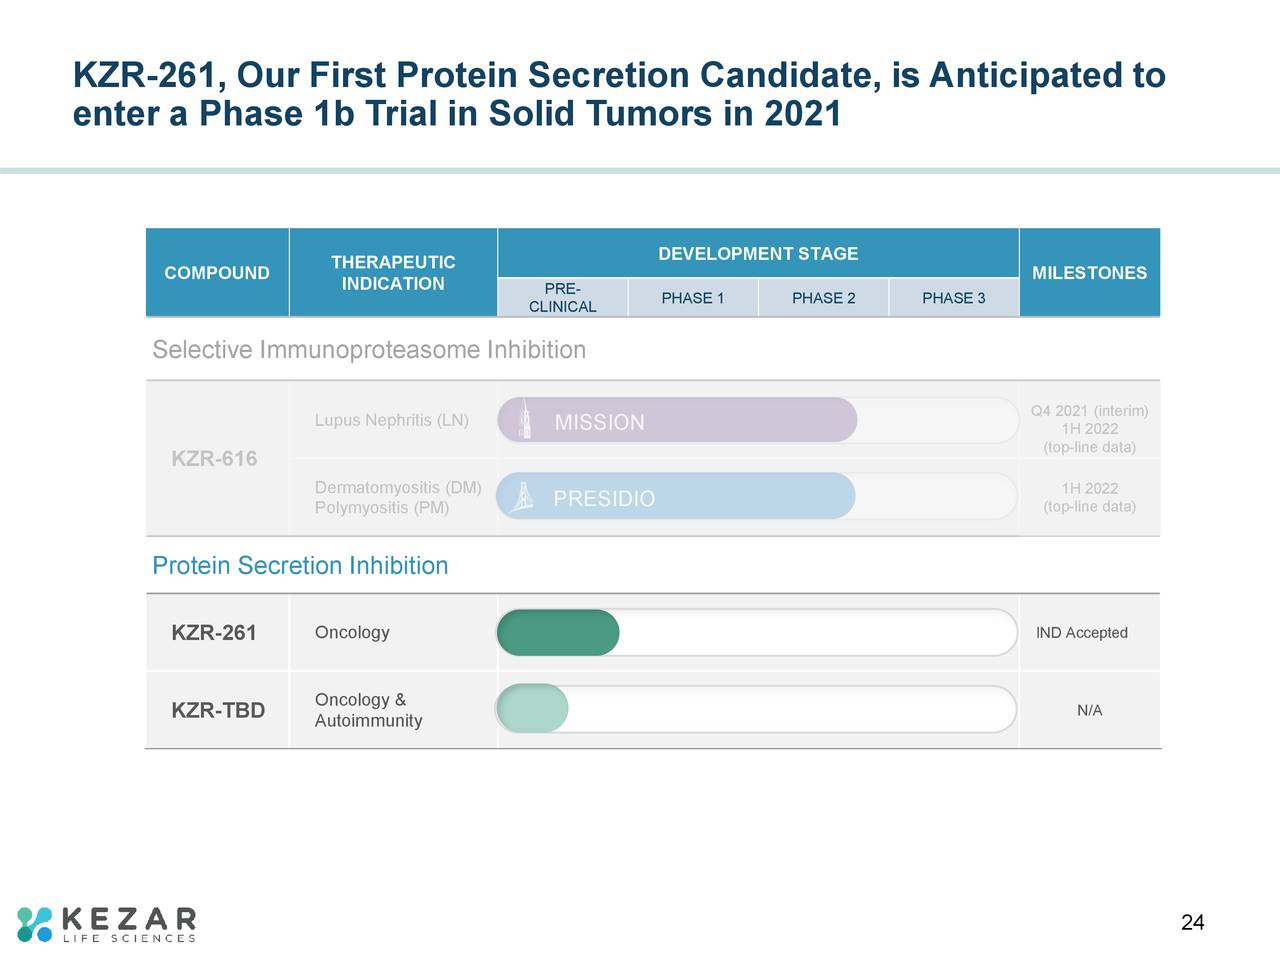 KZR-261, Our First Protein Secretion Candidate, is Anticipated to